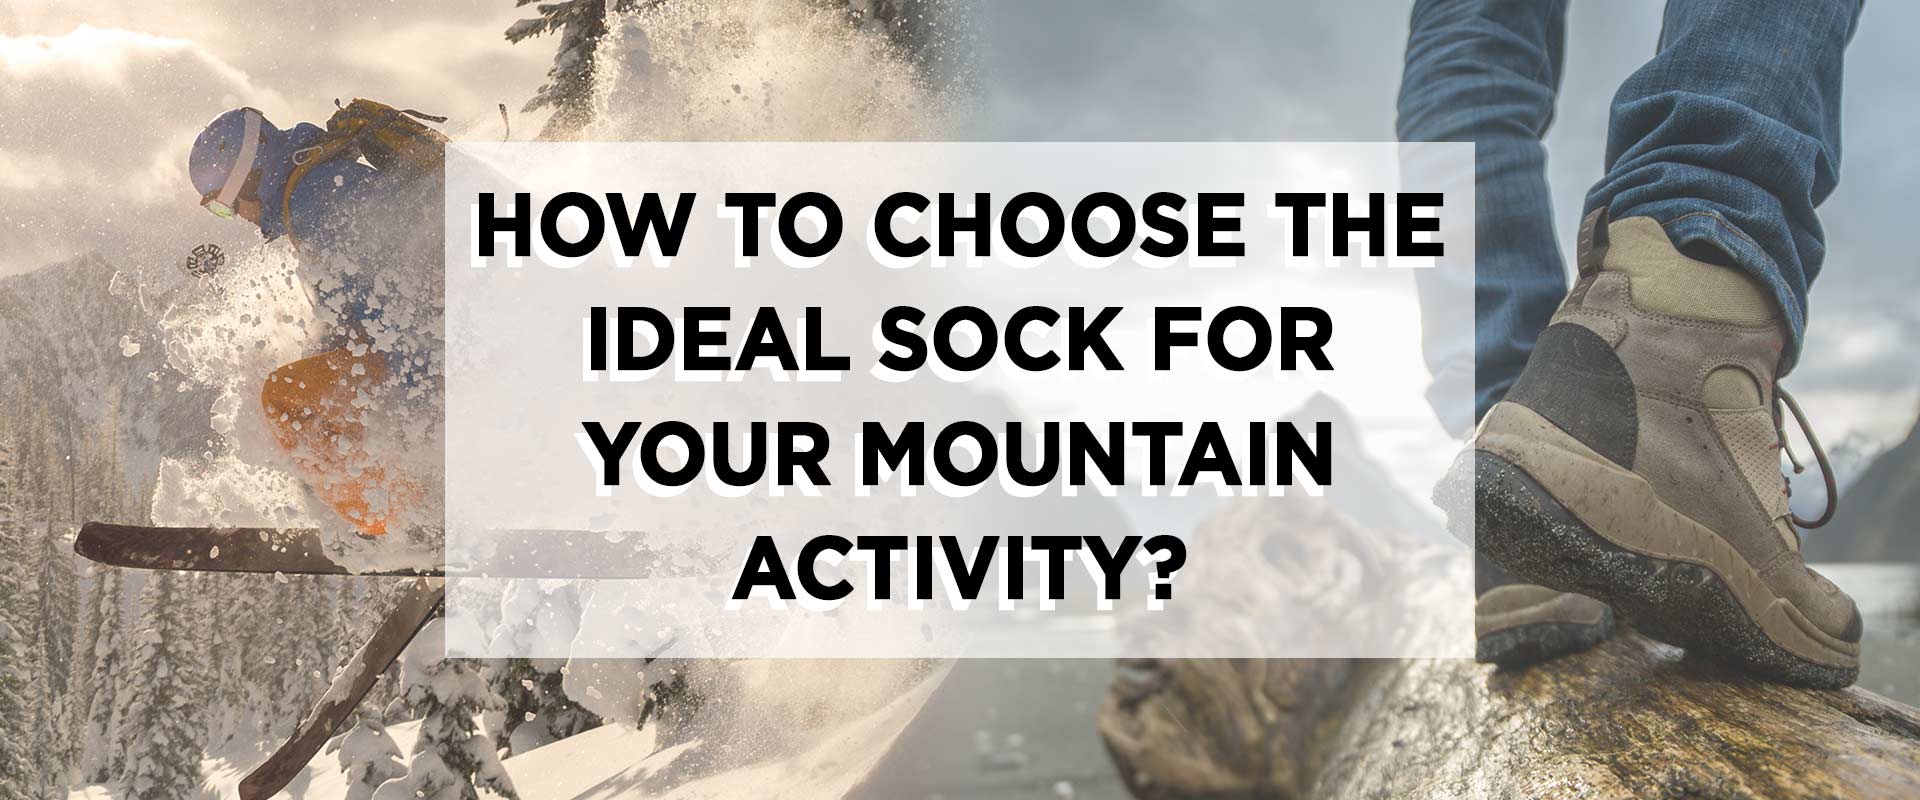 How to choose the ideal sock for your mountain activity?